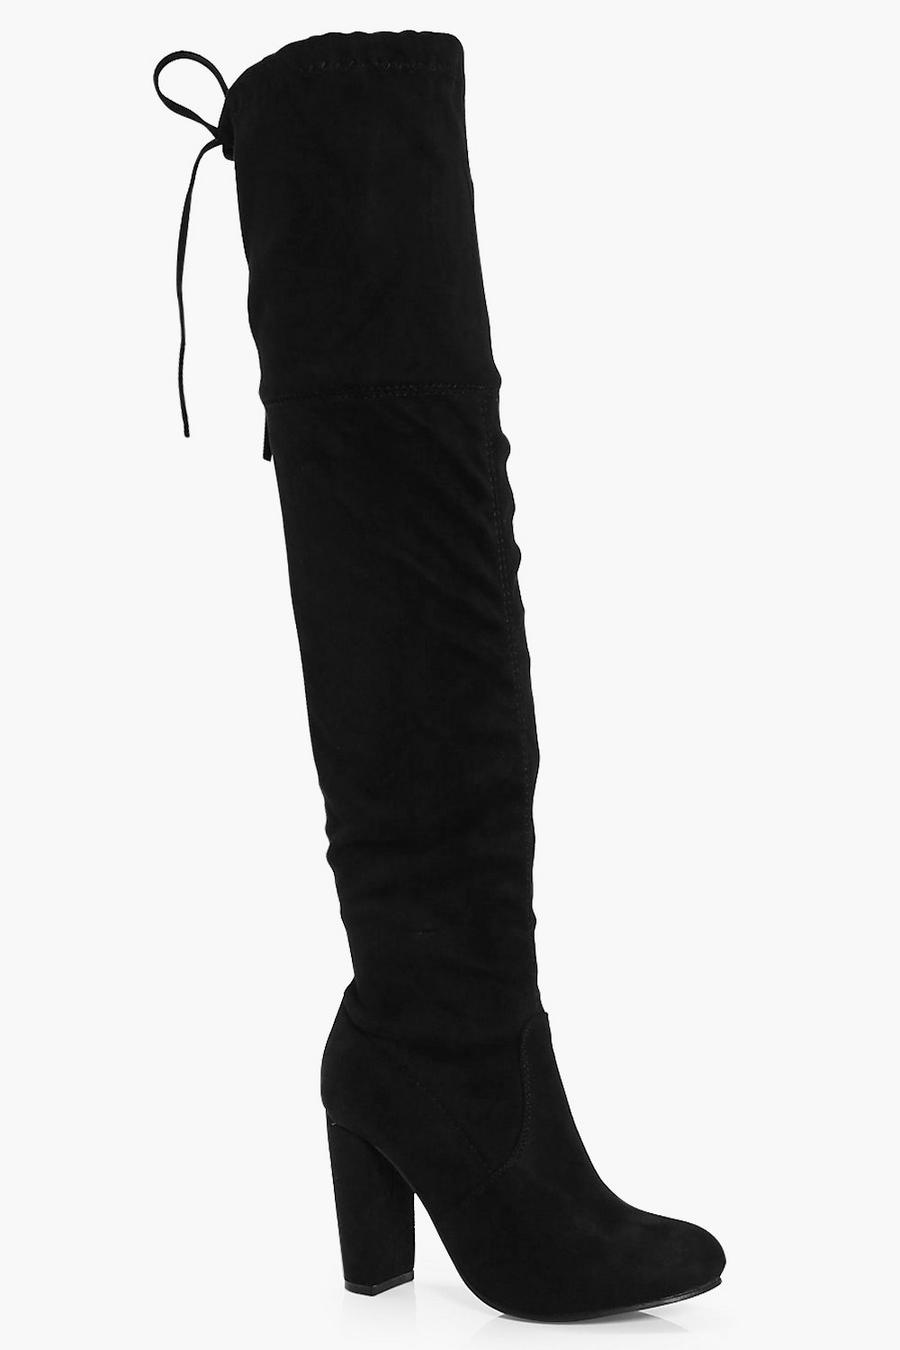 Black Block Heel Thigh High Boots image number 1